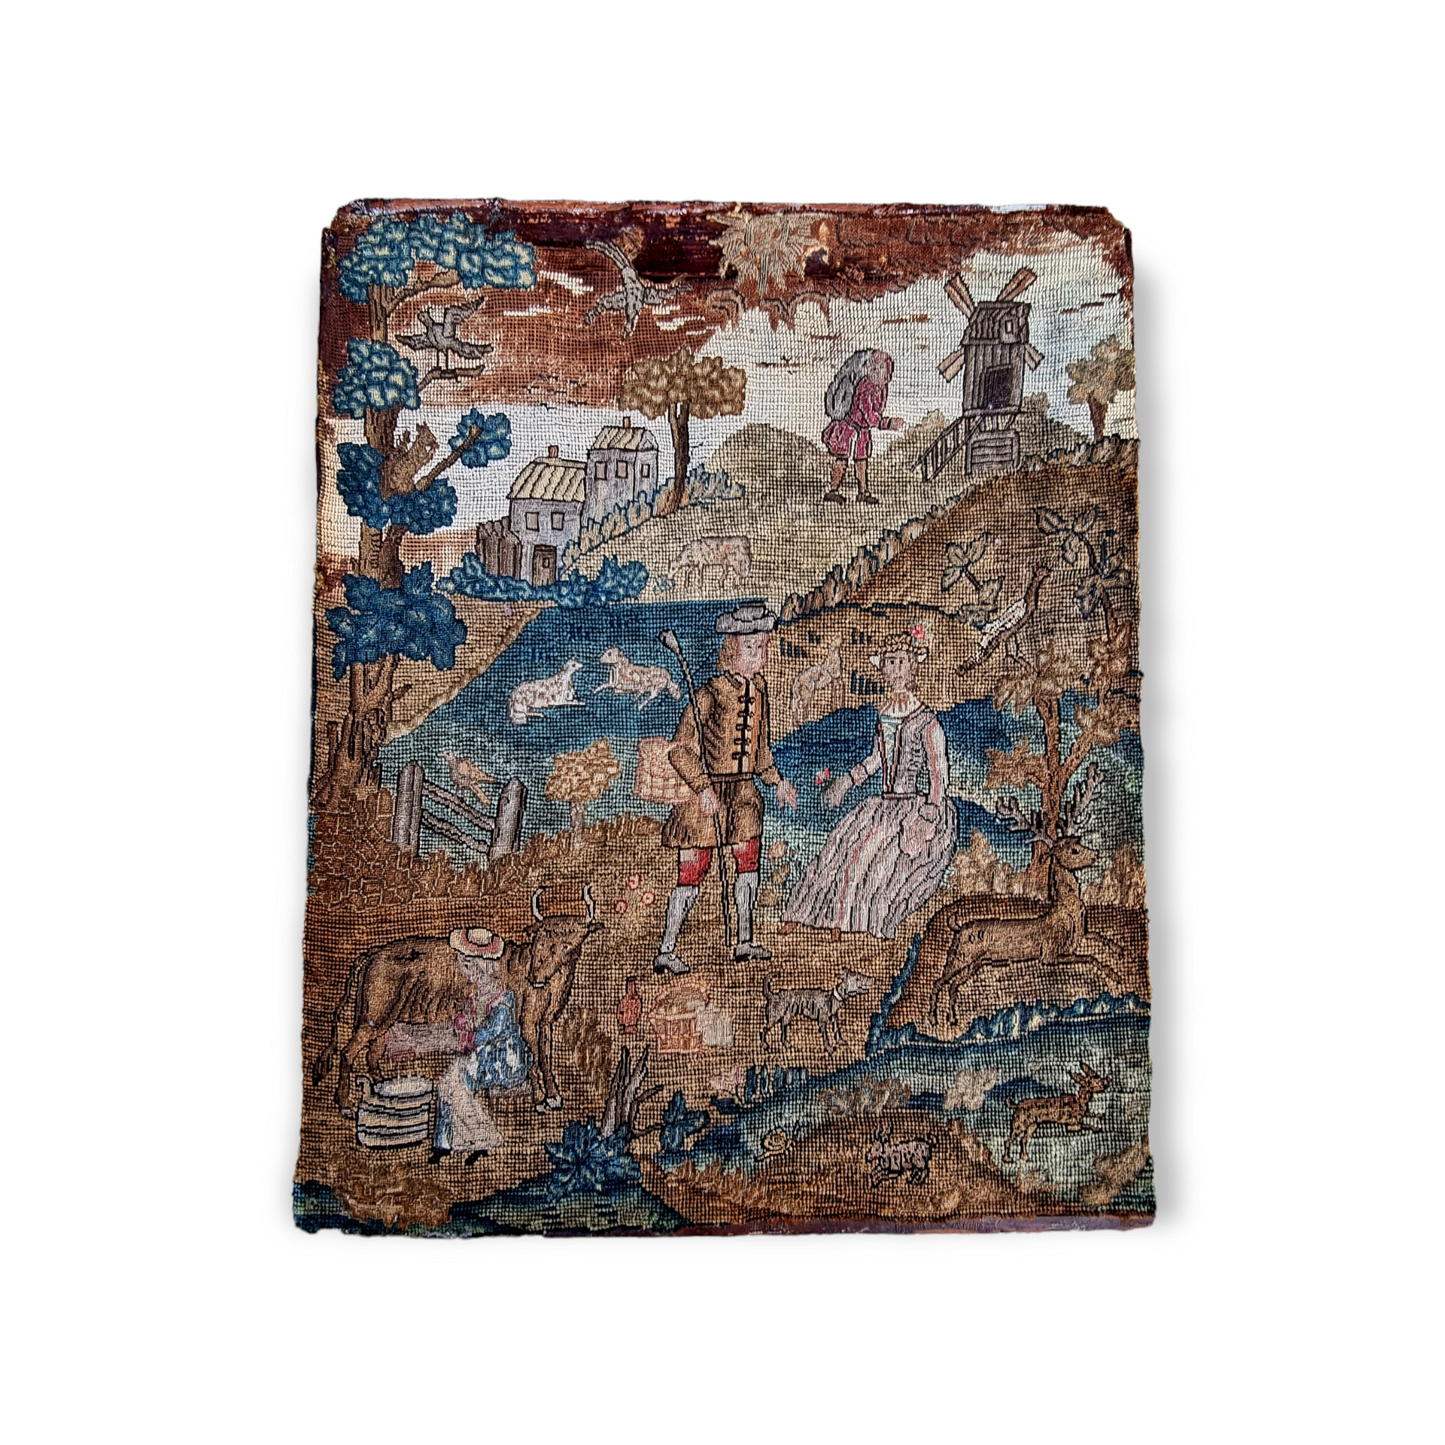 Rare Subject Matter - A Large 17th Century English Antique Needlework Depicting A Country Scene